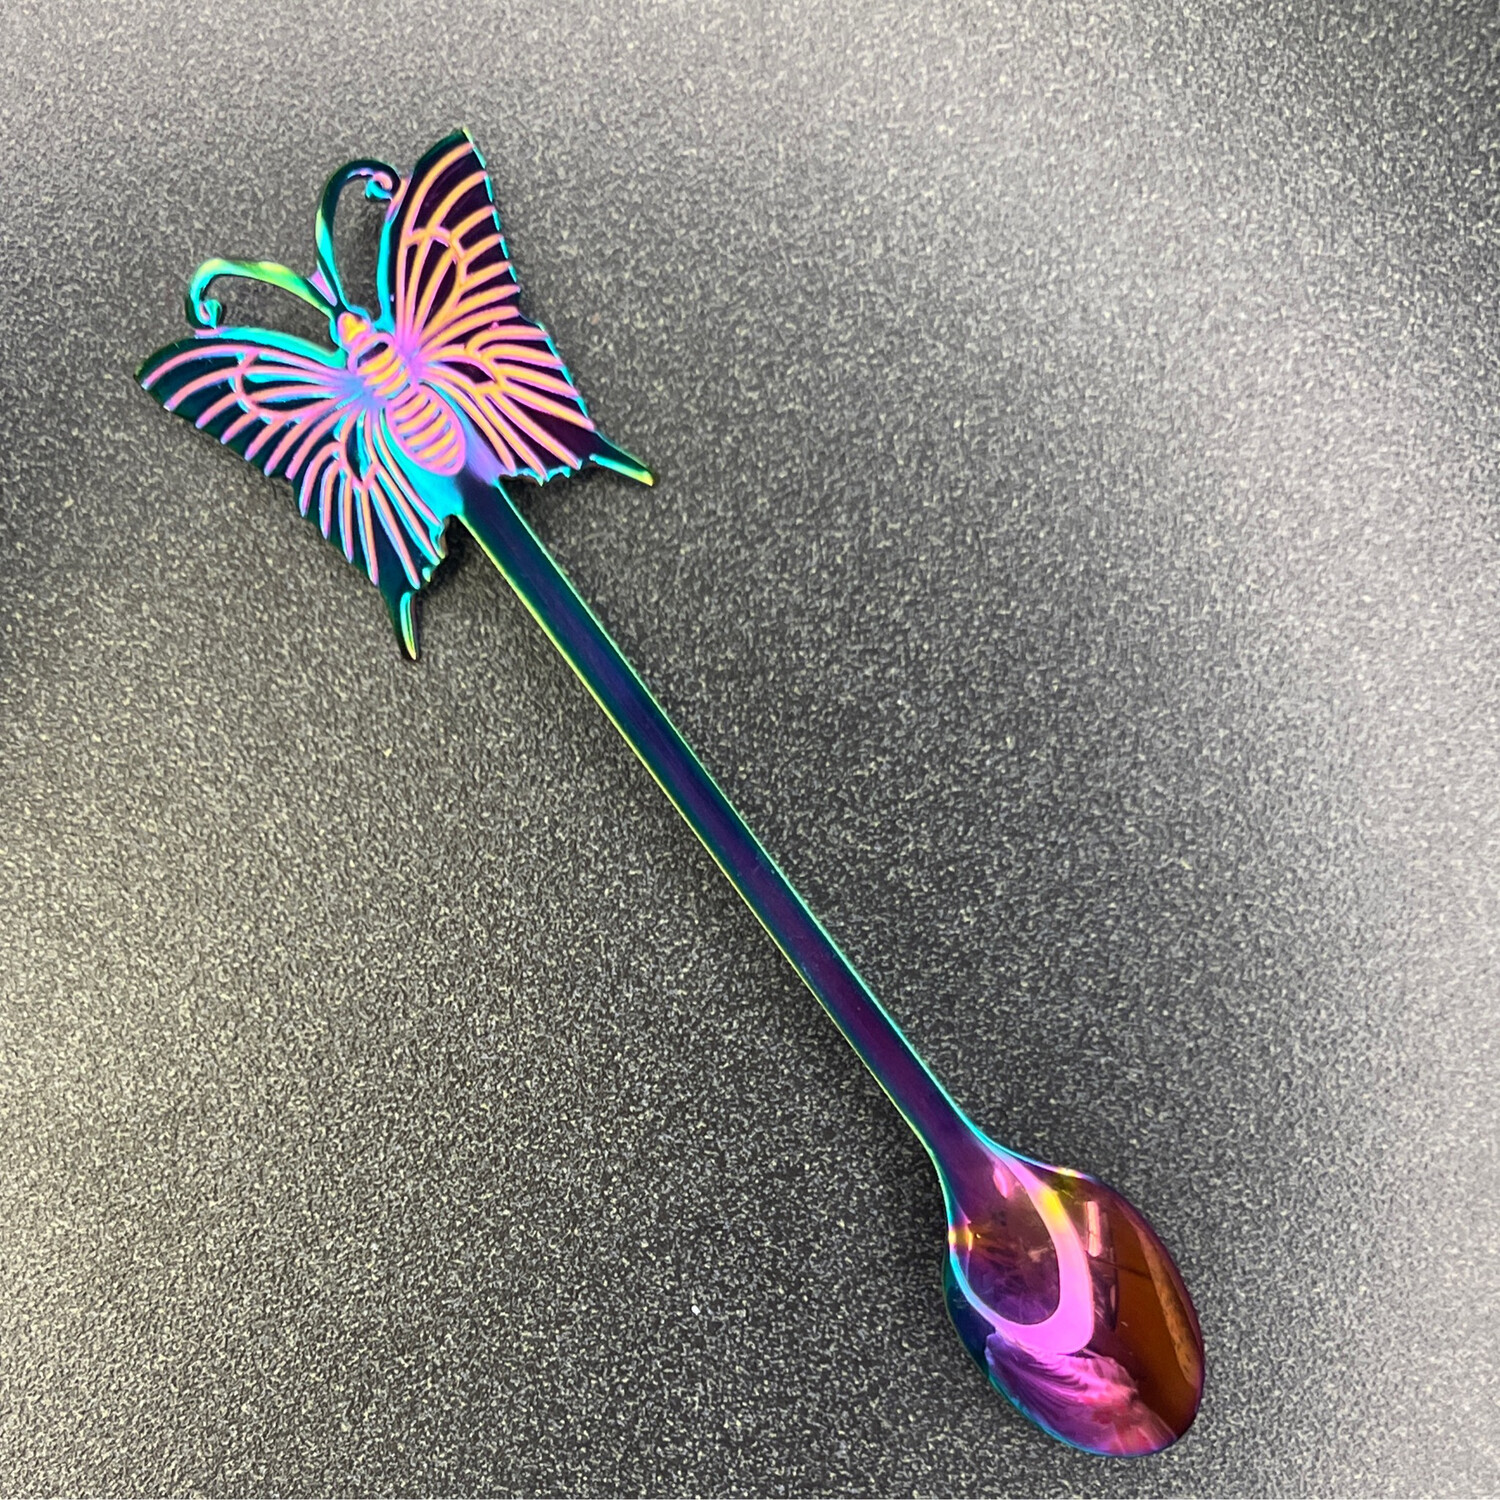 Butterfly Spoon- Small Scooping Size